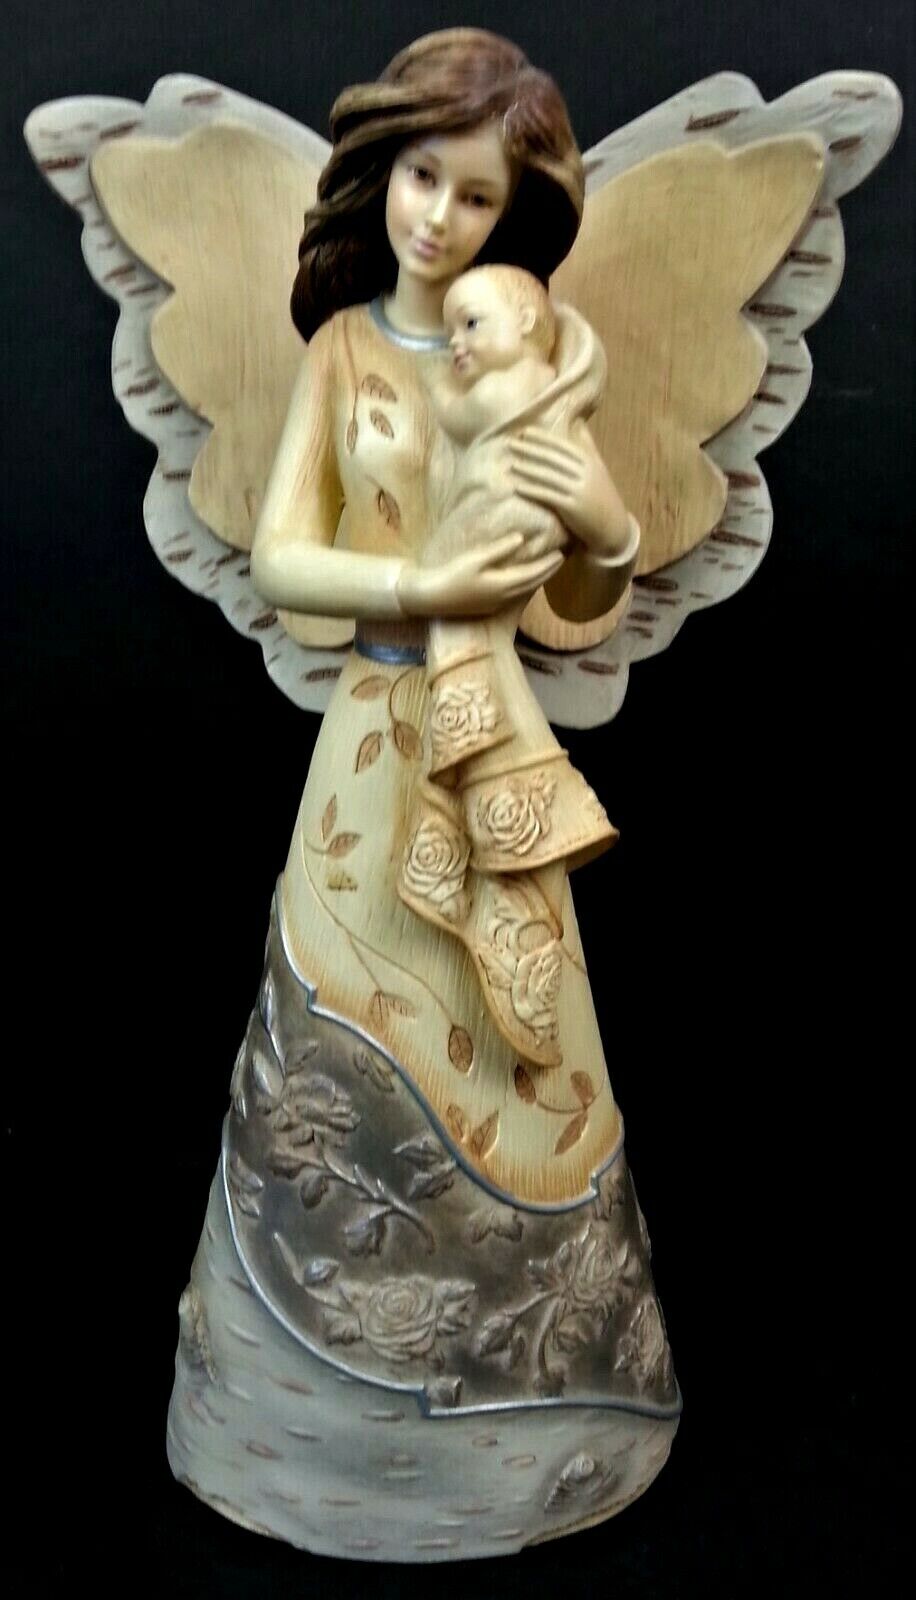 A Mothers Love Elements Figurine 82005 Barbara McDonald MISSING HALO Angel Baby